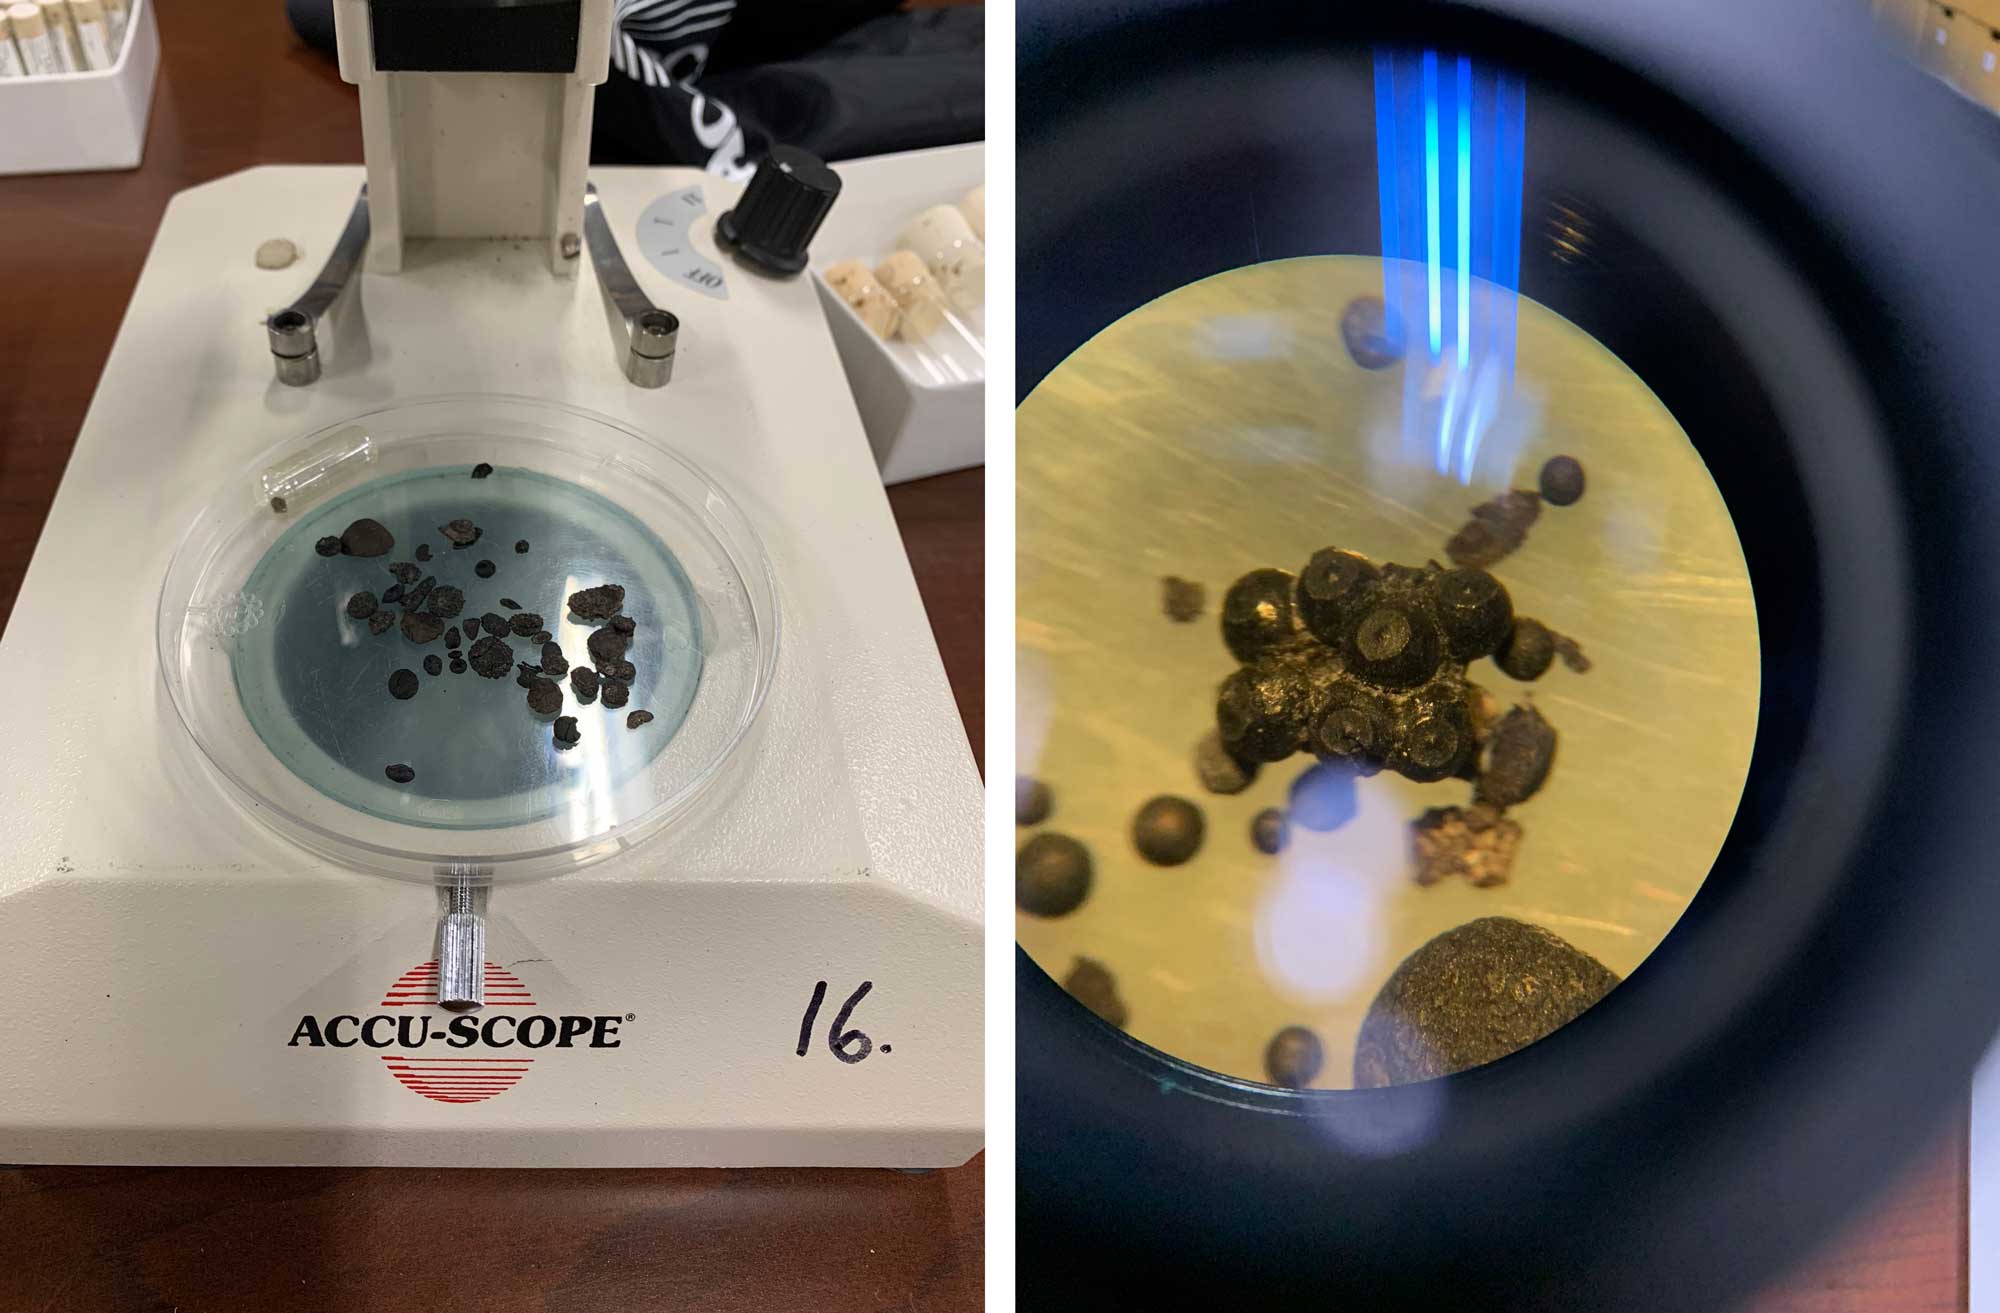 2-Panel figure. Panel 1: Photograph of plant fossils in a petri dish on the stage of a dissecting microscope. Panel 2: Image of a plant fossil taken through the eyepiece of a dissecting microscope.